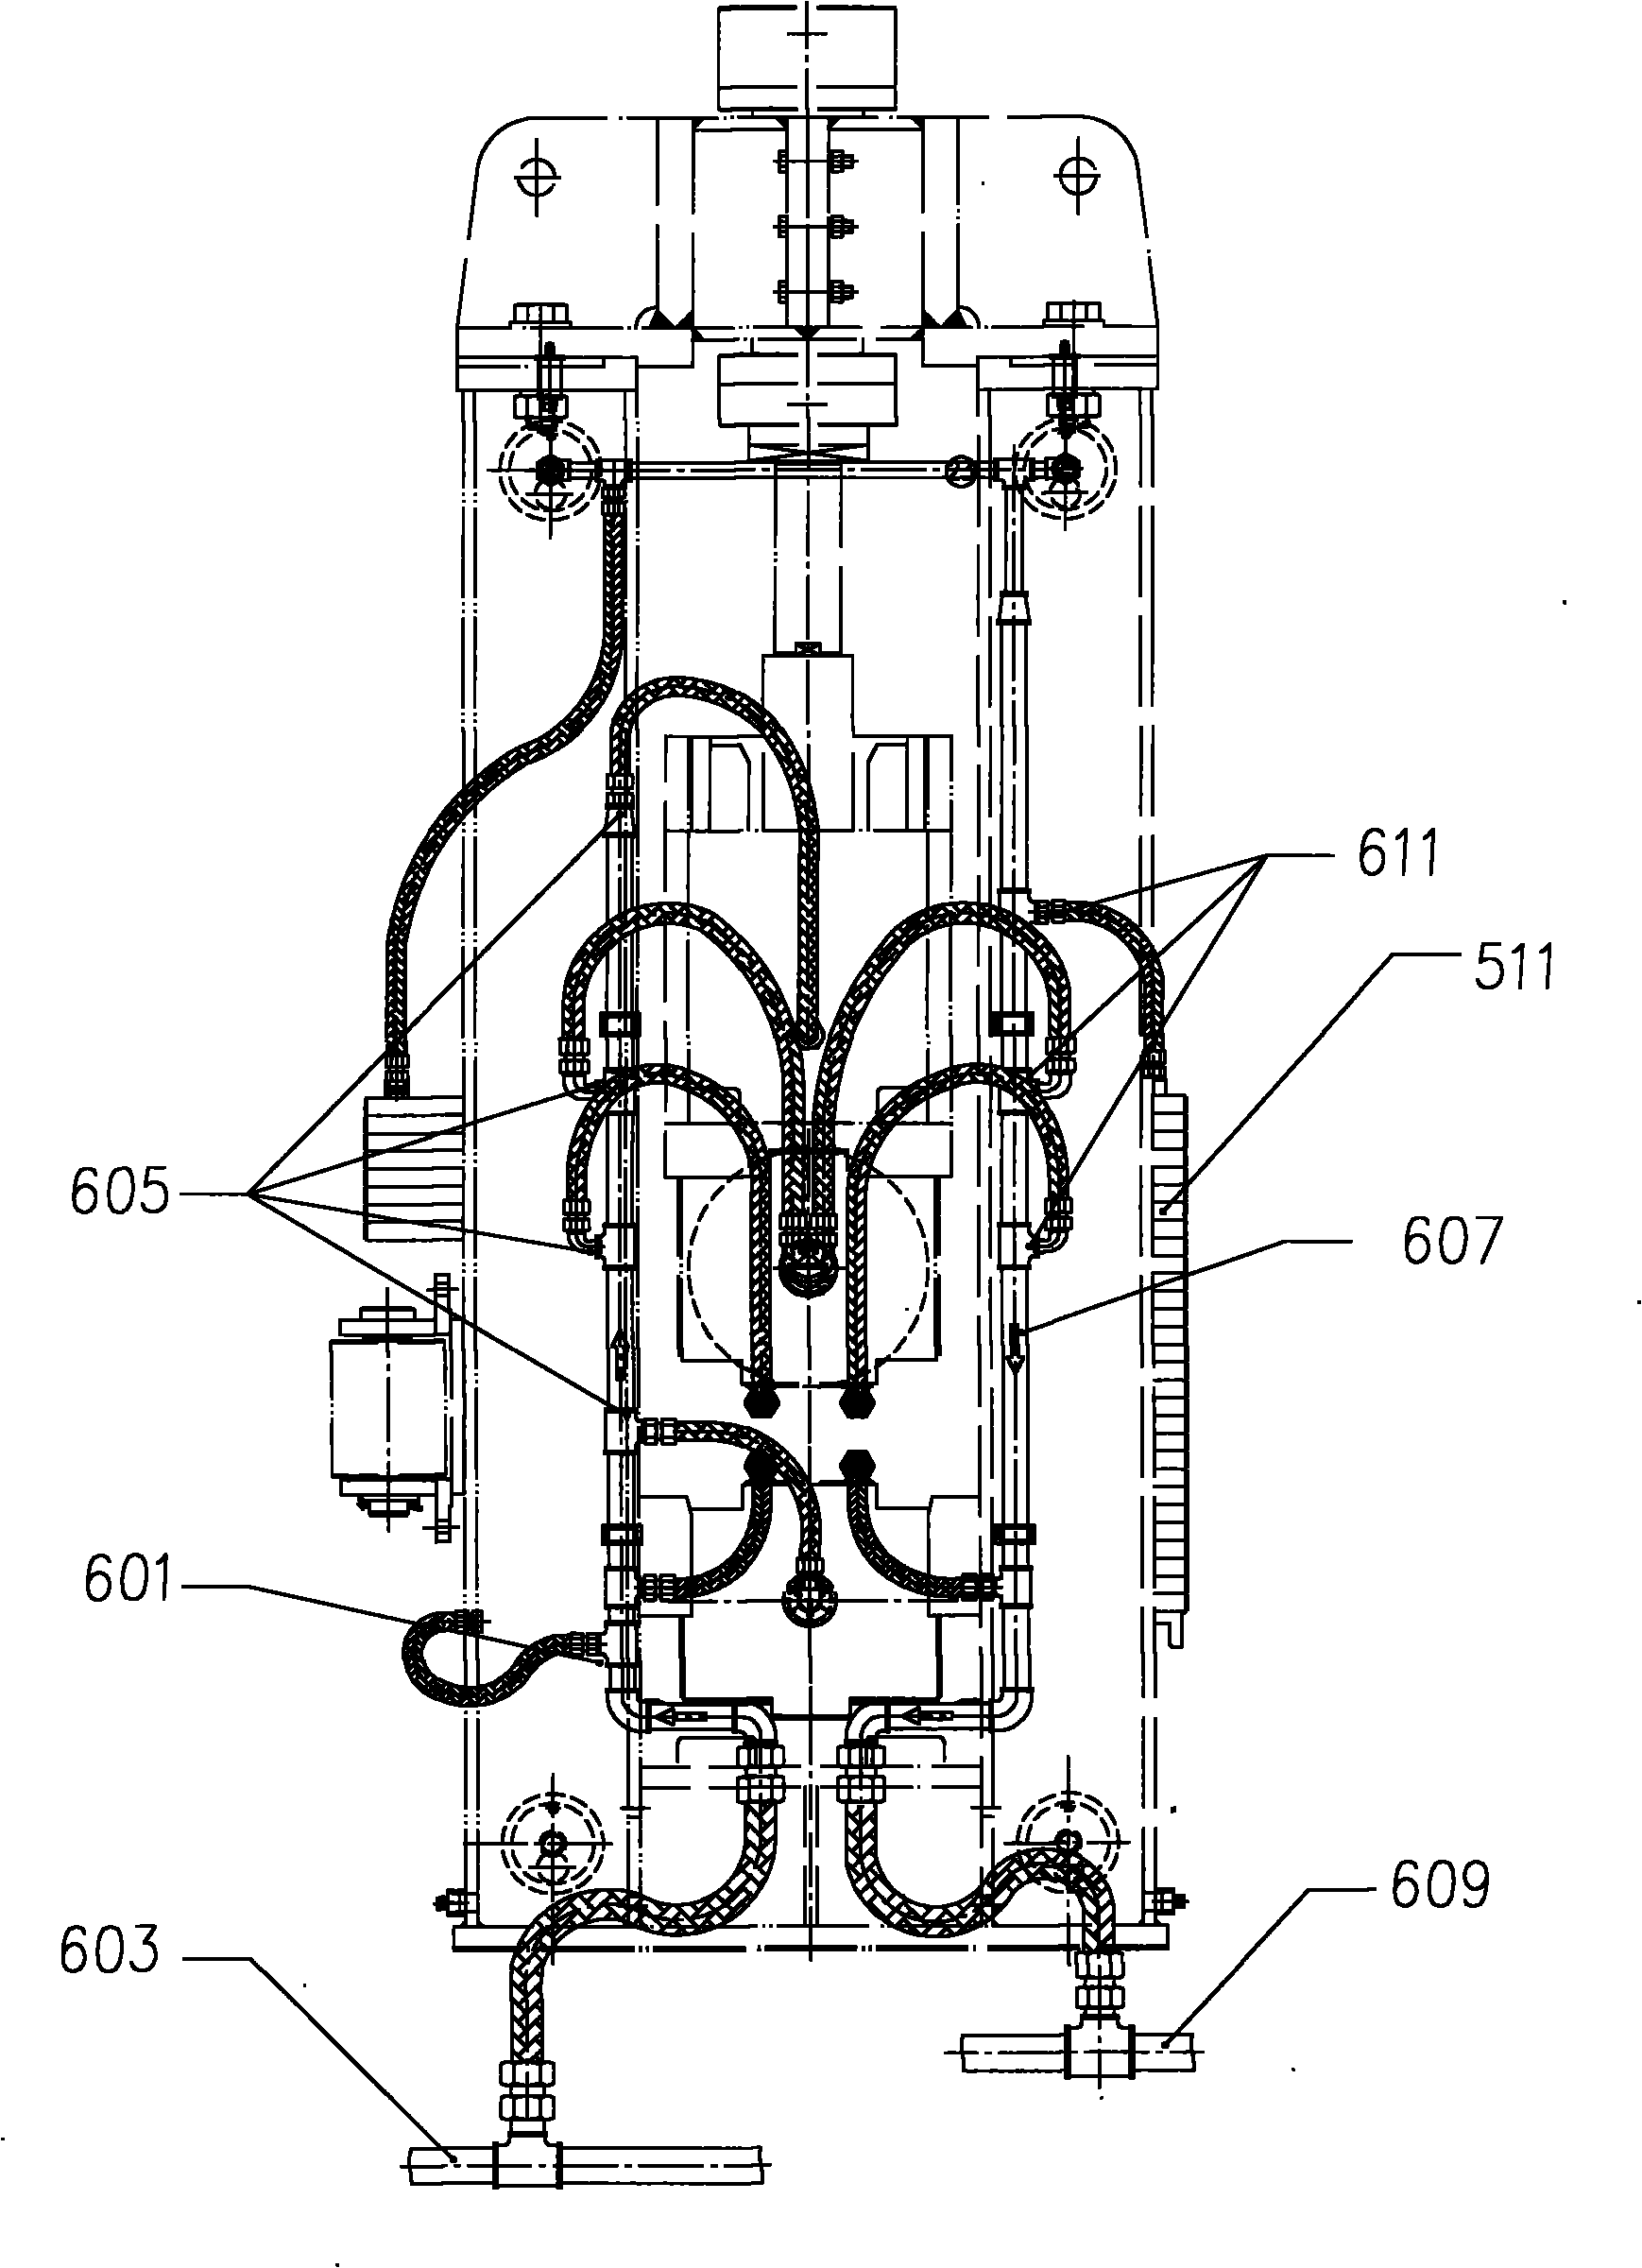 Tension leveler for continuous caster